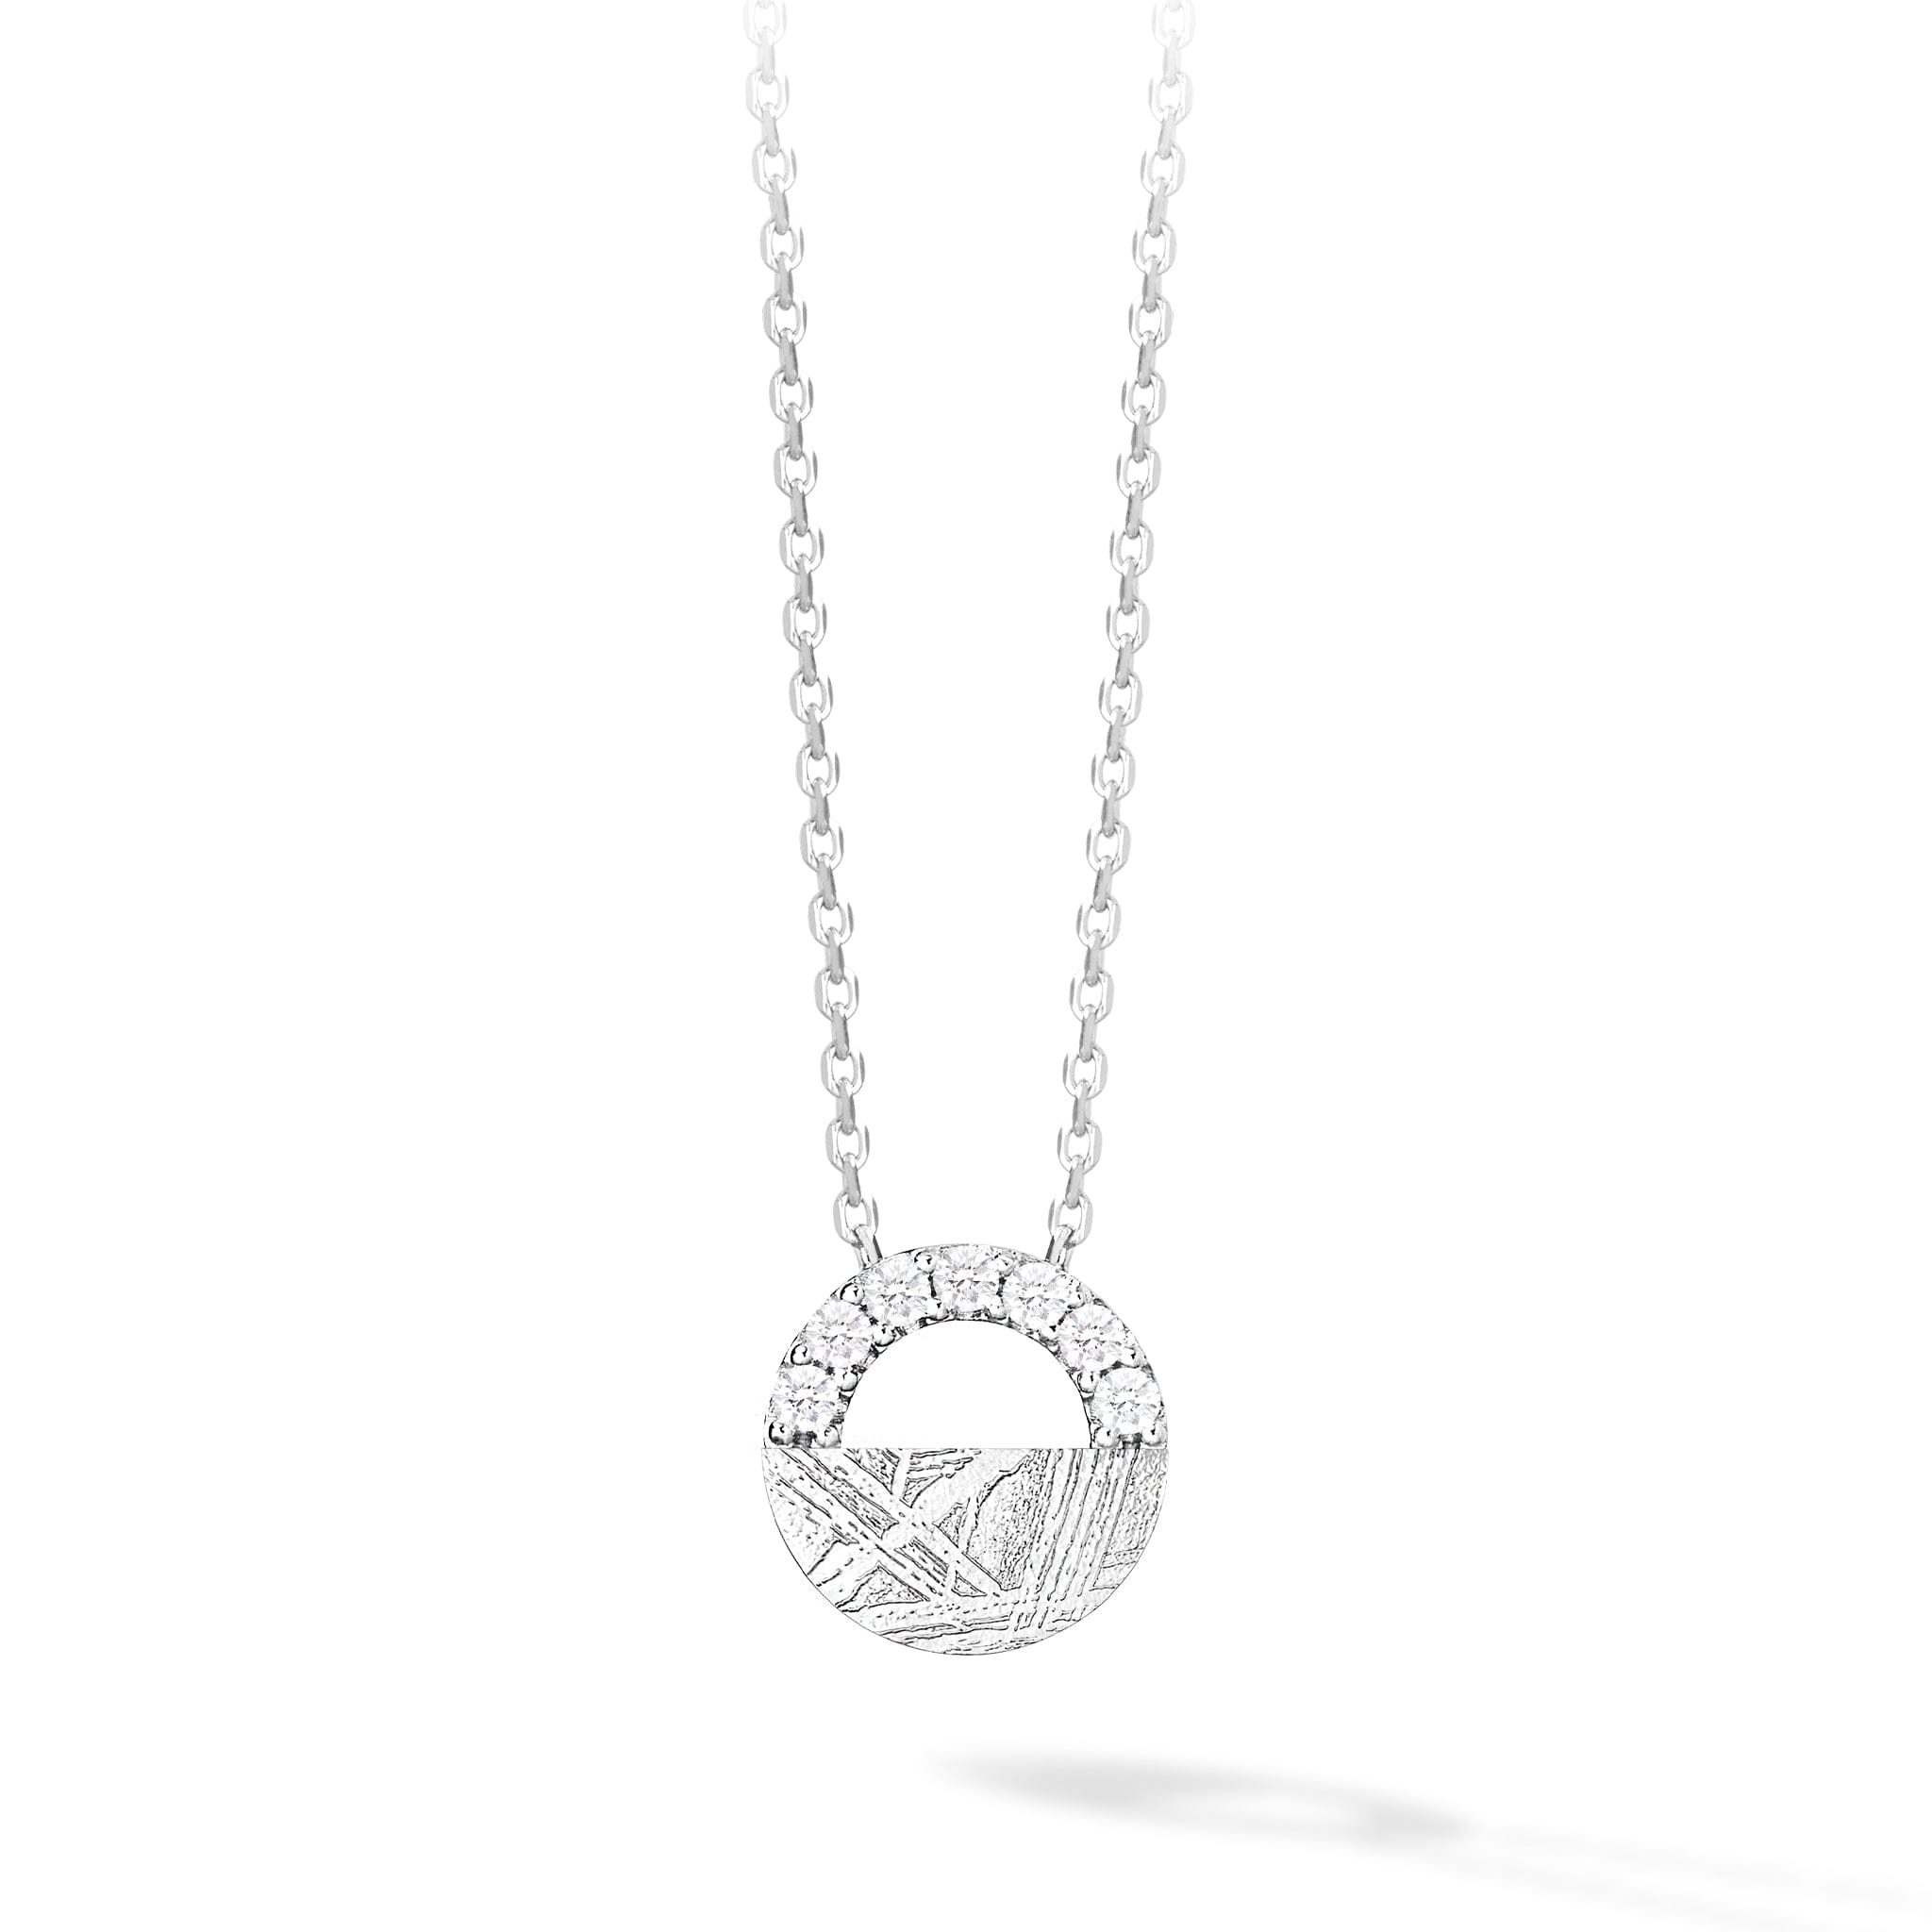 Women's Starry Night Necklace with Meteorite Necklaces WAA FASHION GROUP 